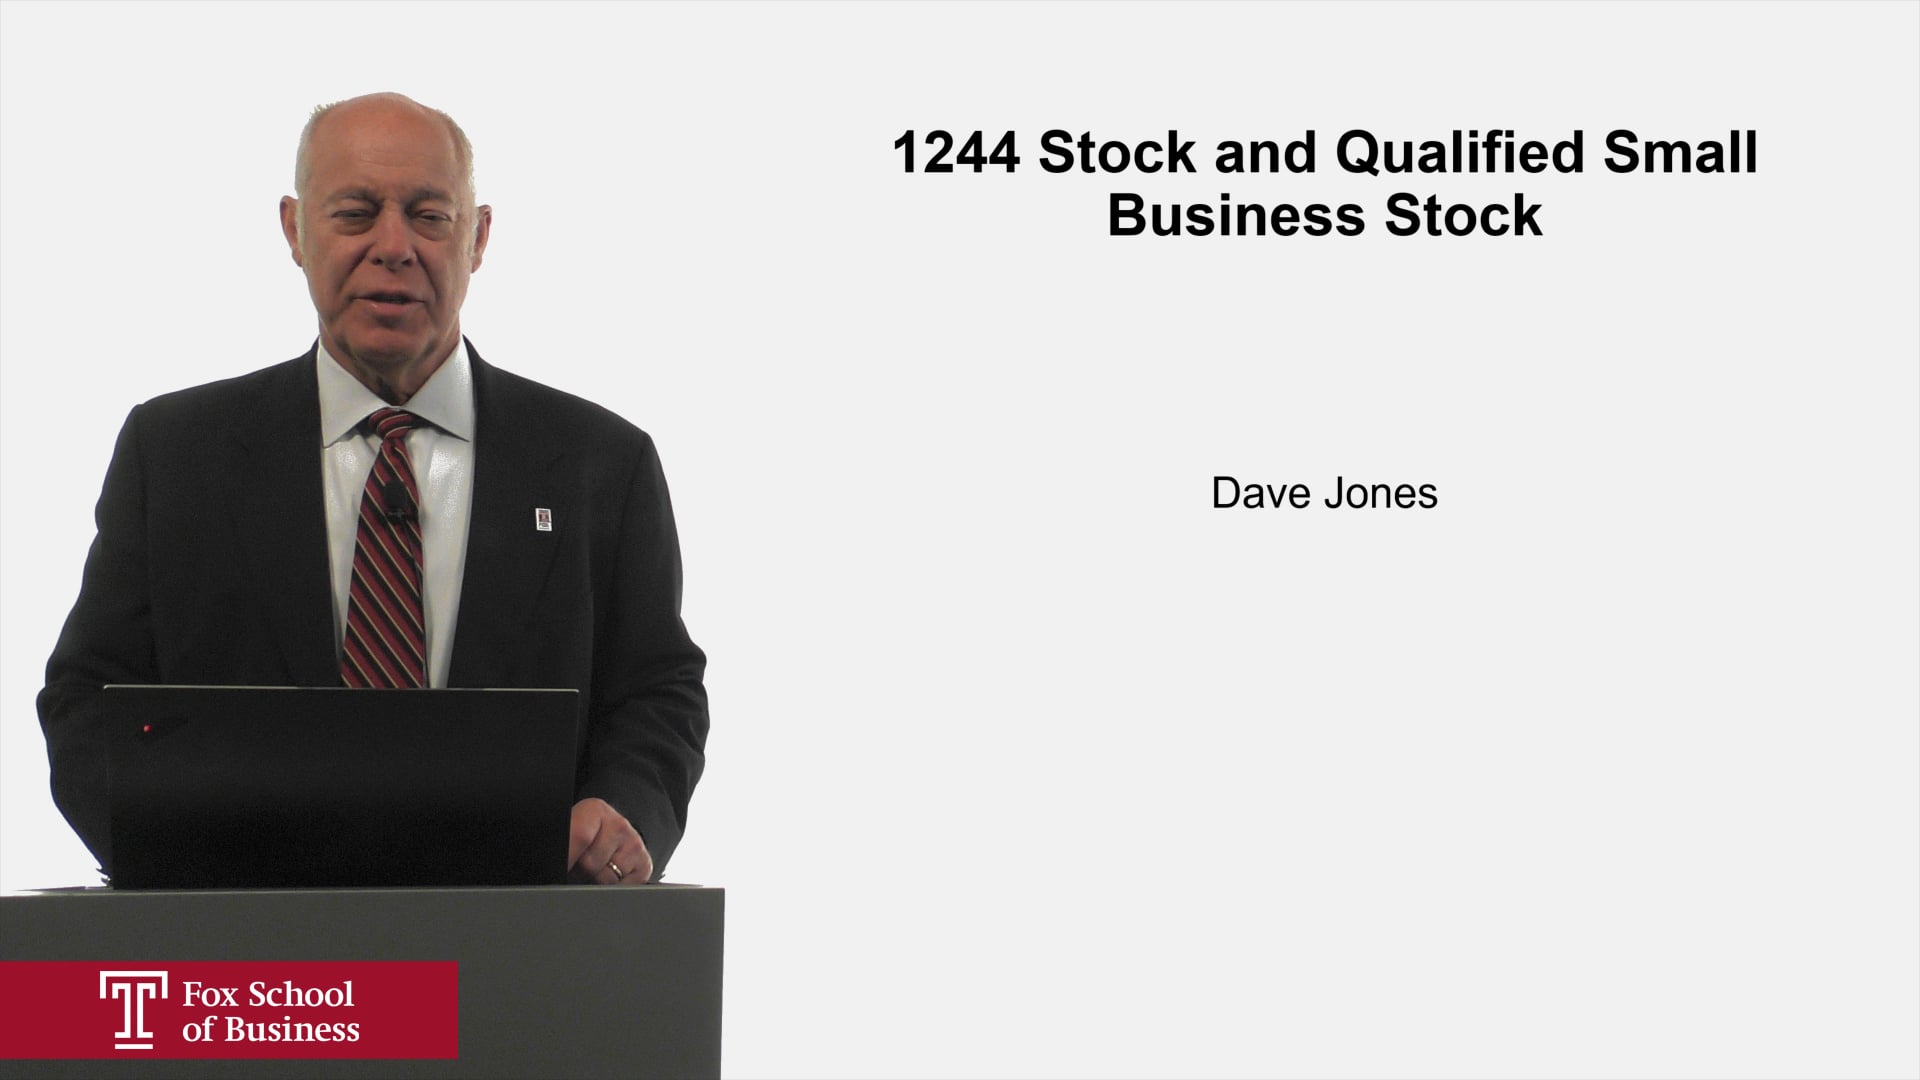 1244 Stock and Qualified Small Business Stock